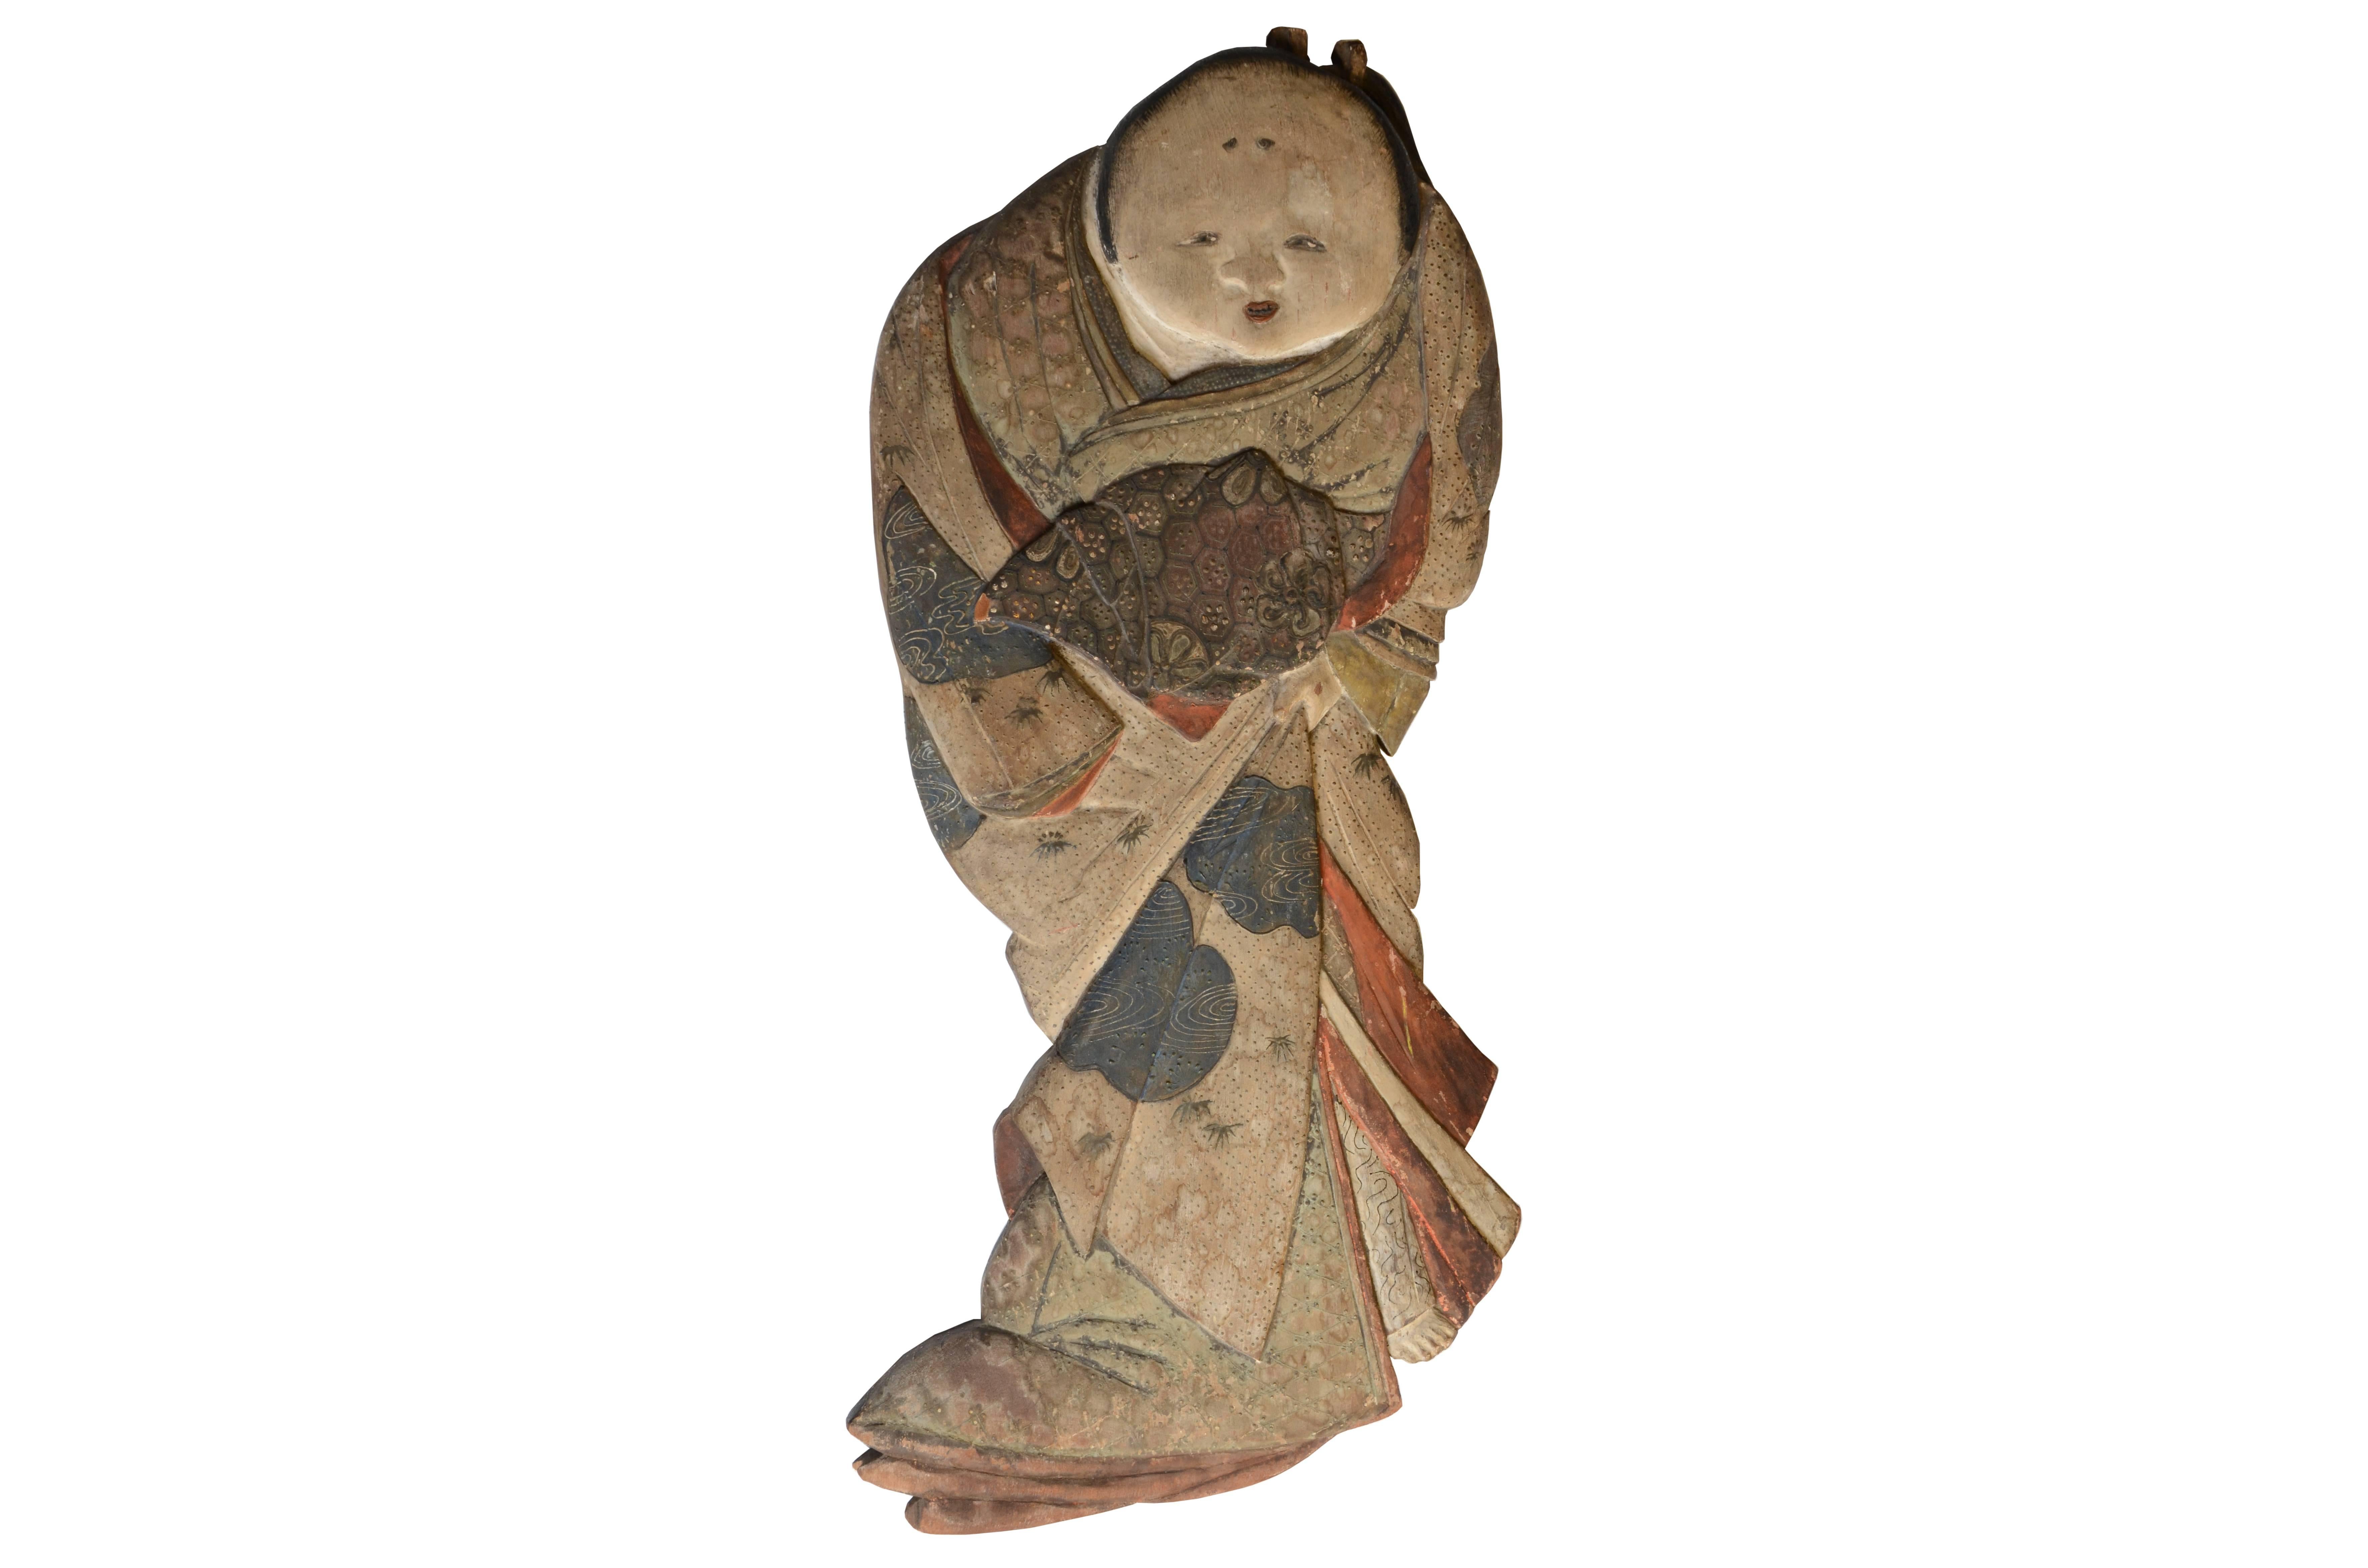 Rare and highly unusual Japanese Folk Art wood carving depicting the folk heroine and good luck figure Otafuku with a finely painted erotic design on the interior and a carved inscription on the reverse, late Meiji period, circa 1900.

The